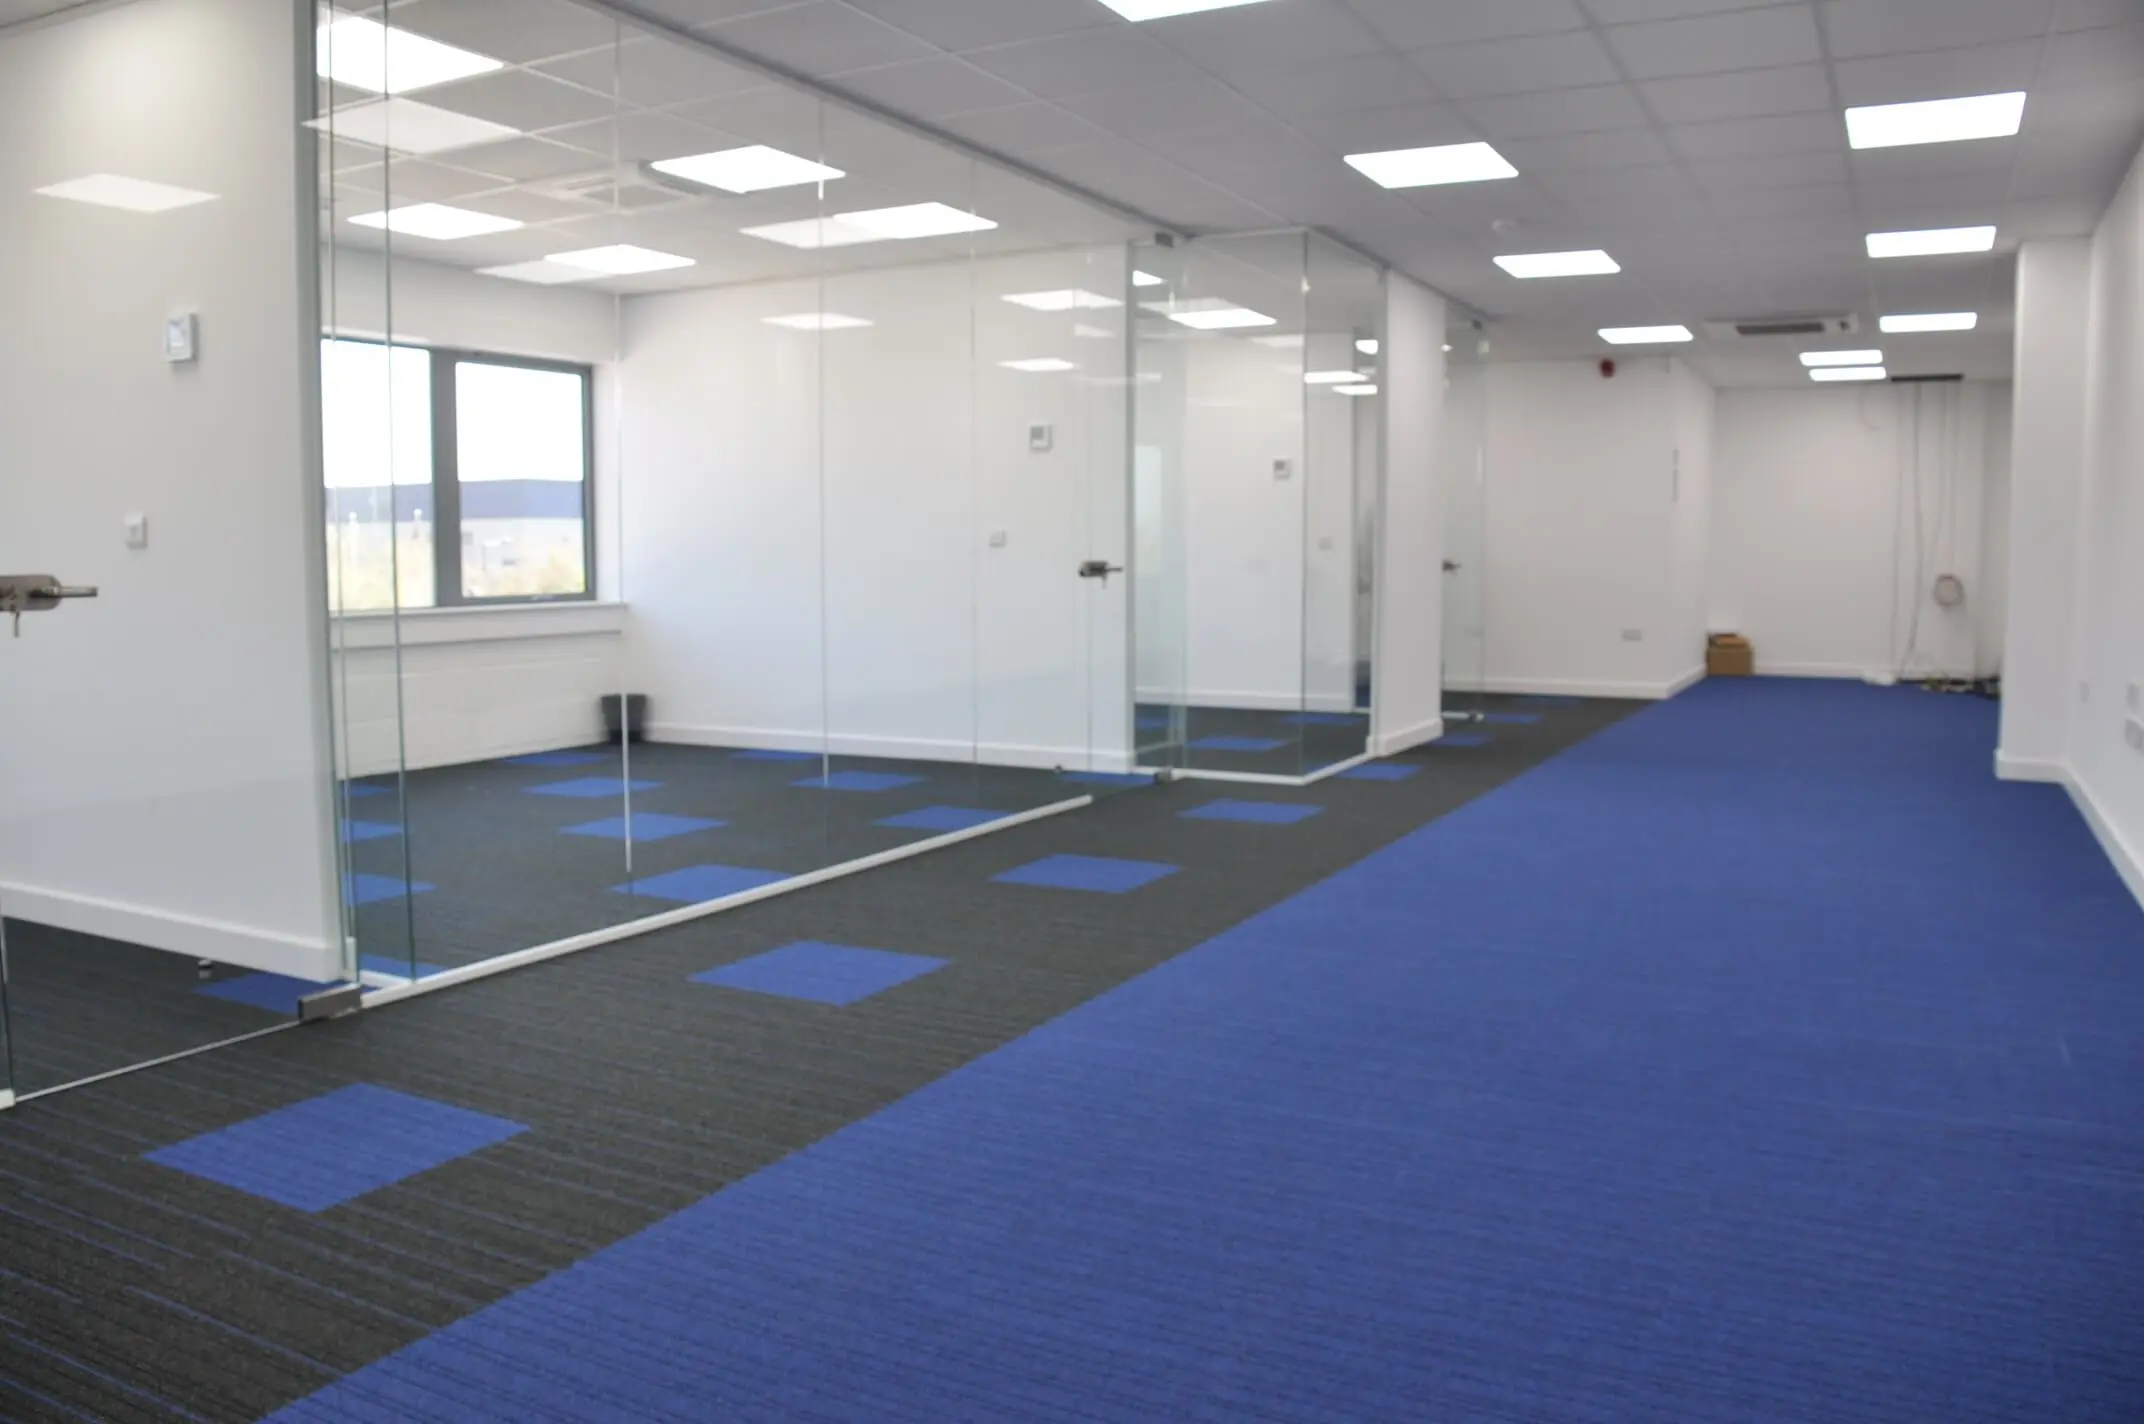 Designer office flooring with single glazed glass partition